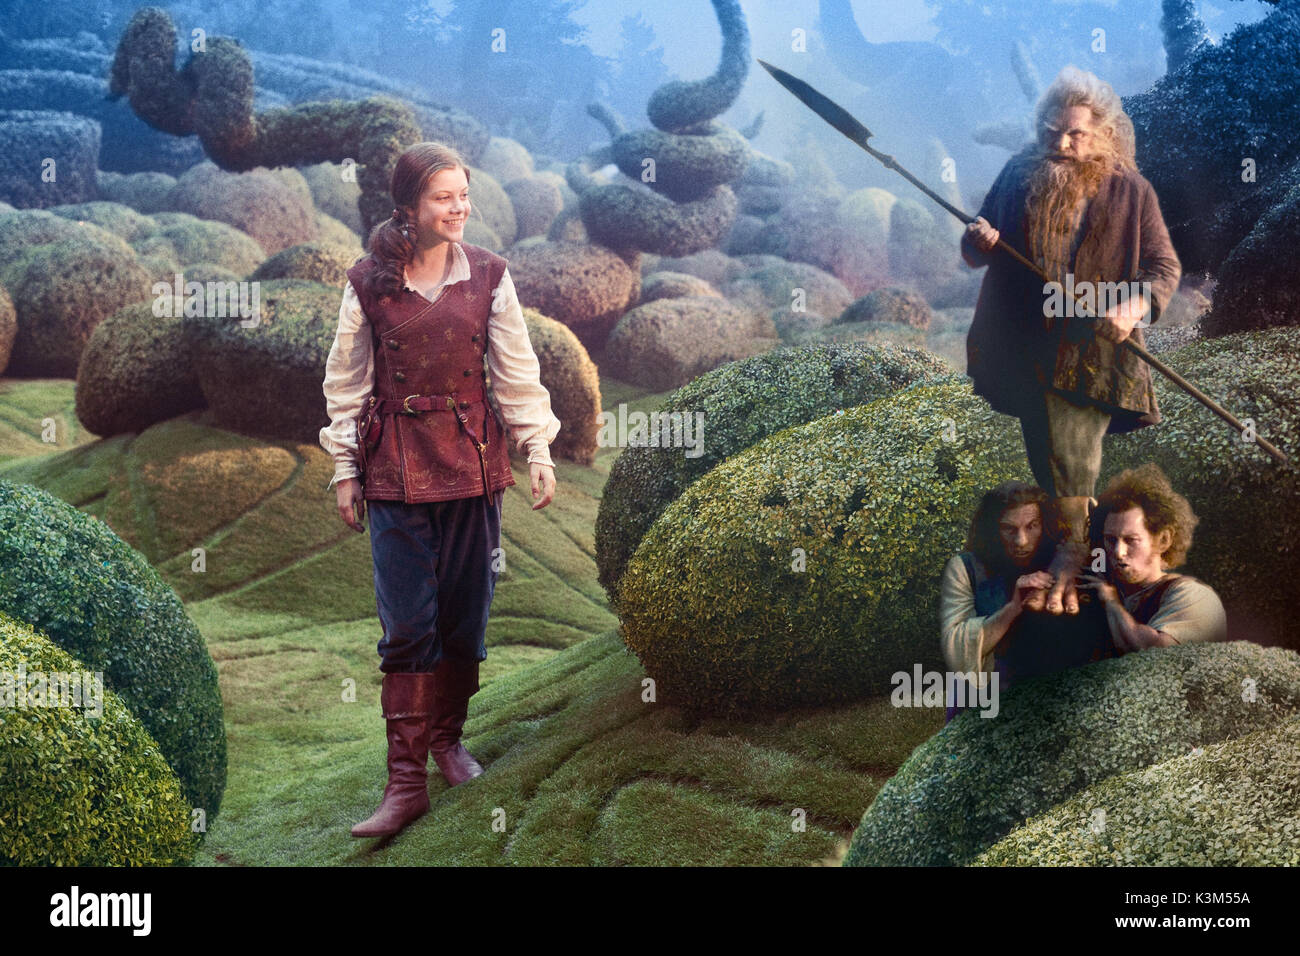 THE CHRONICLES OF NARNIA: THE VOYAGE OF THE DAWN TREADER GEORGIE HENLEY     Date: 2010 Stock Photo